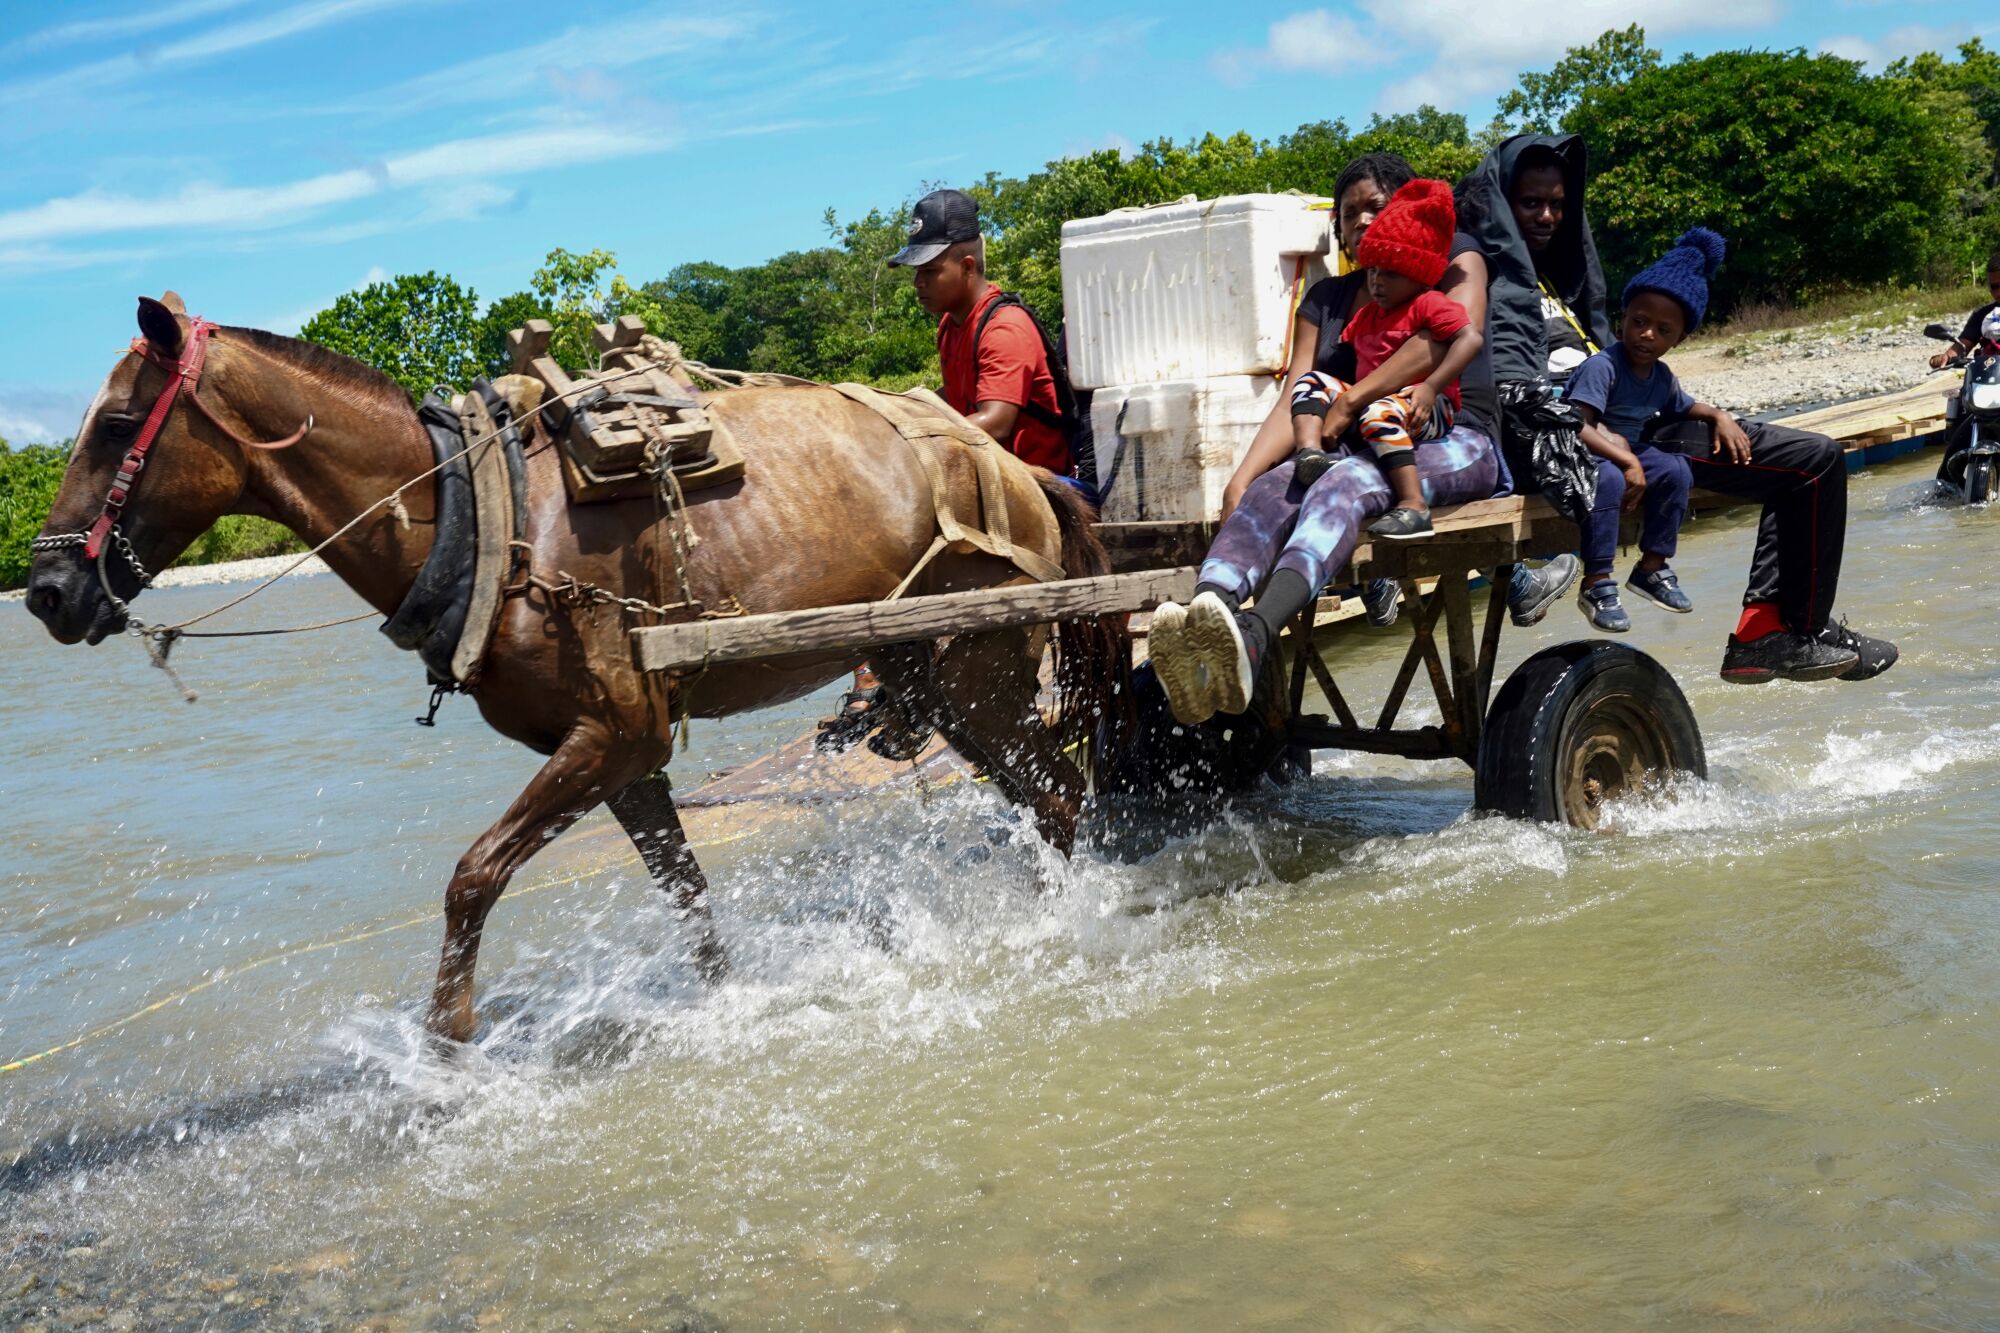 U.S.-bound migrant families travel on horse carts from the town of Acandí to the entrance of the Darien gap.